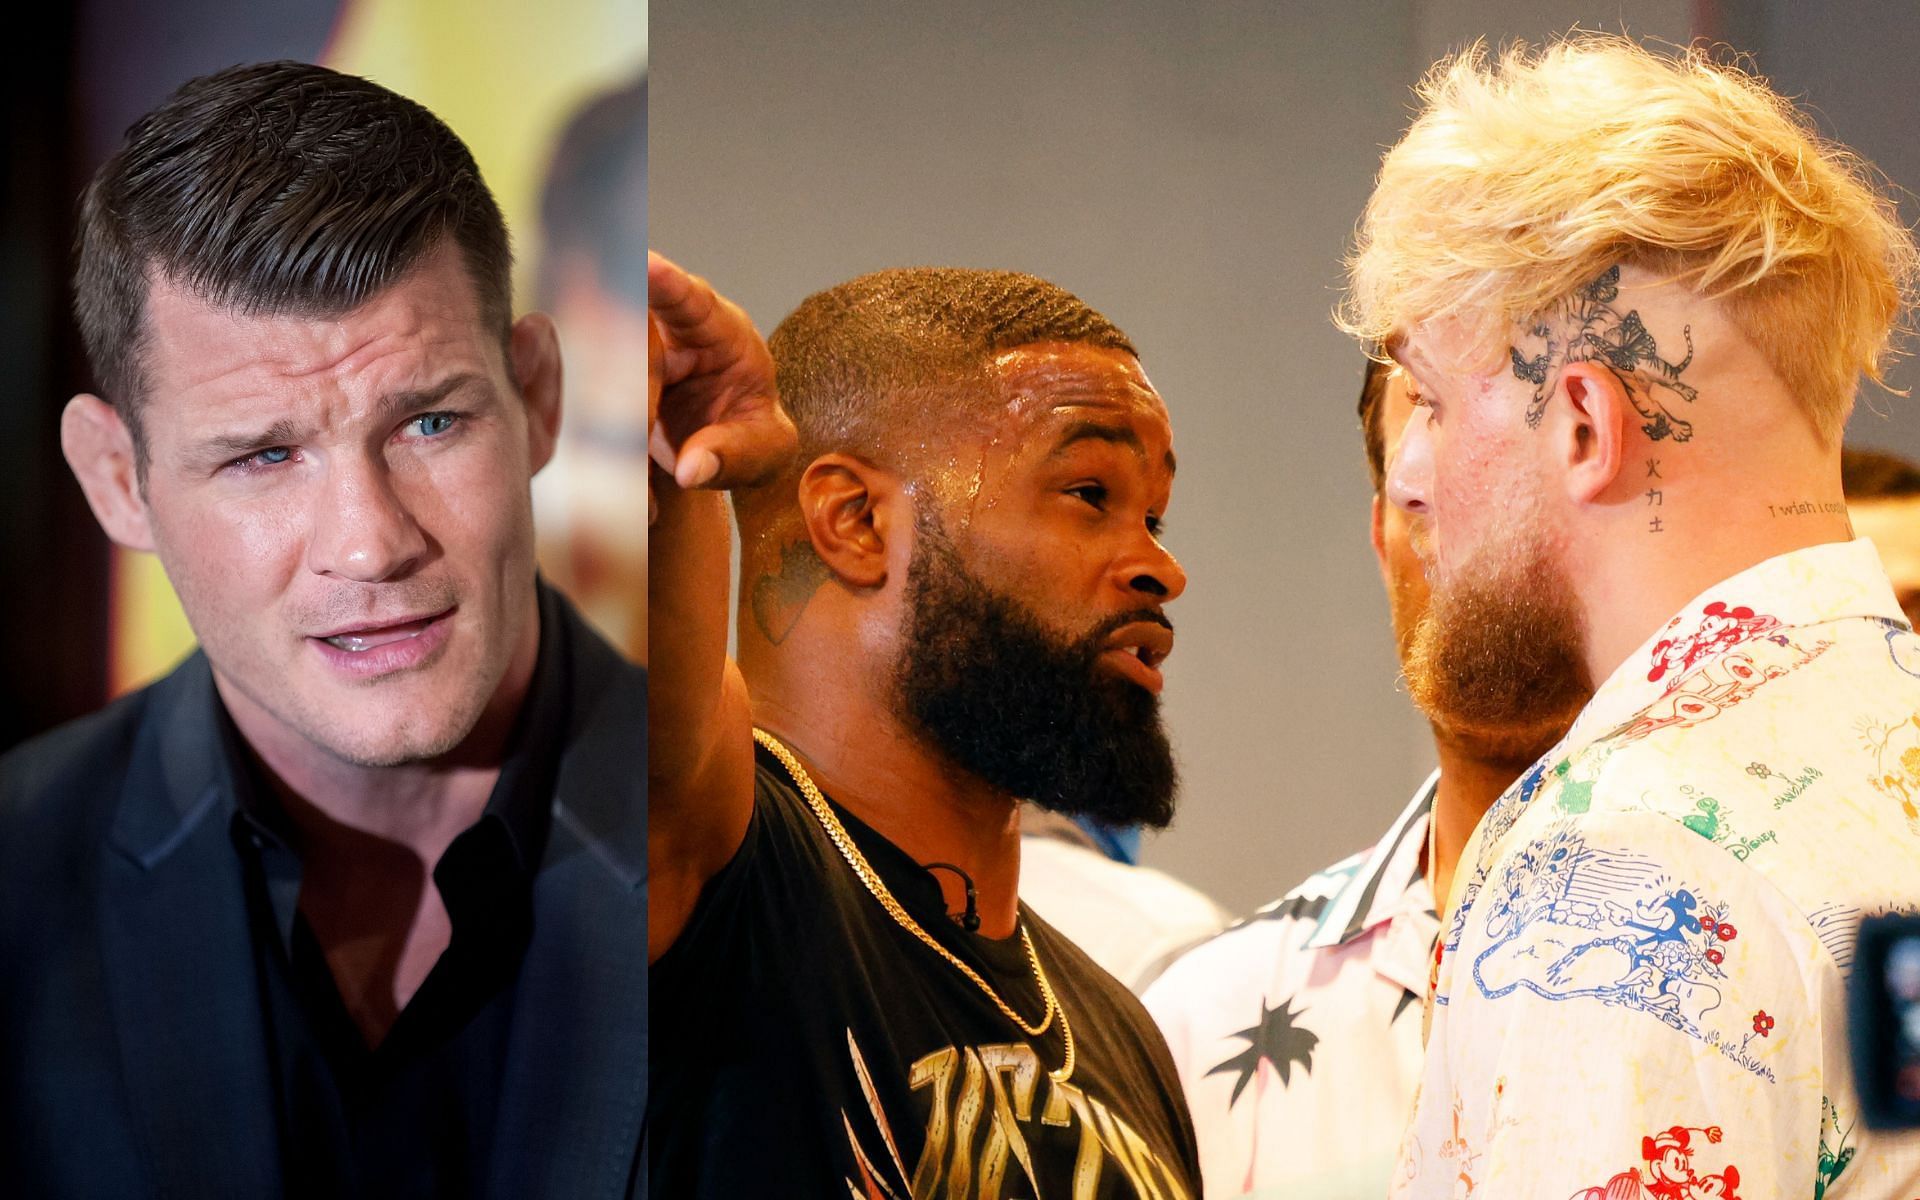 Michael Bisping (left), Tyron Woodley (center) and Jake Paul (right)